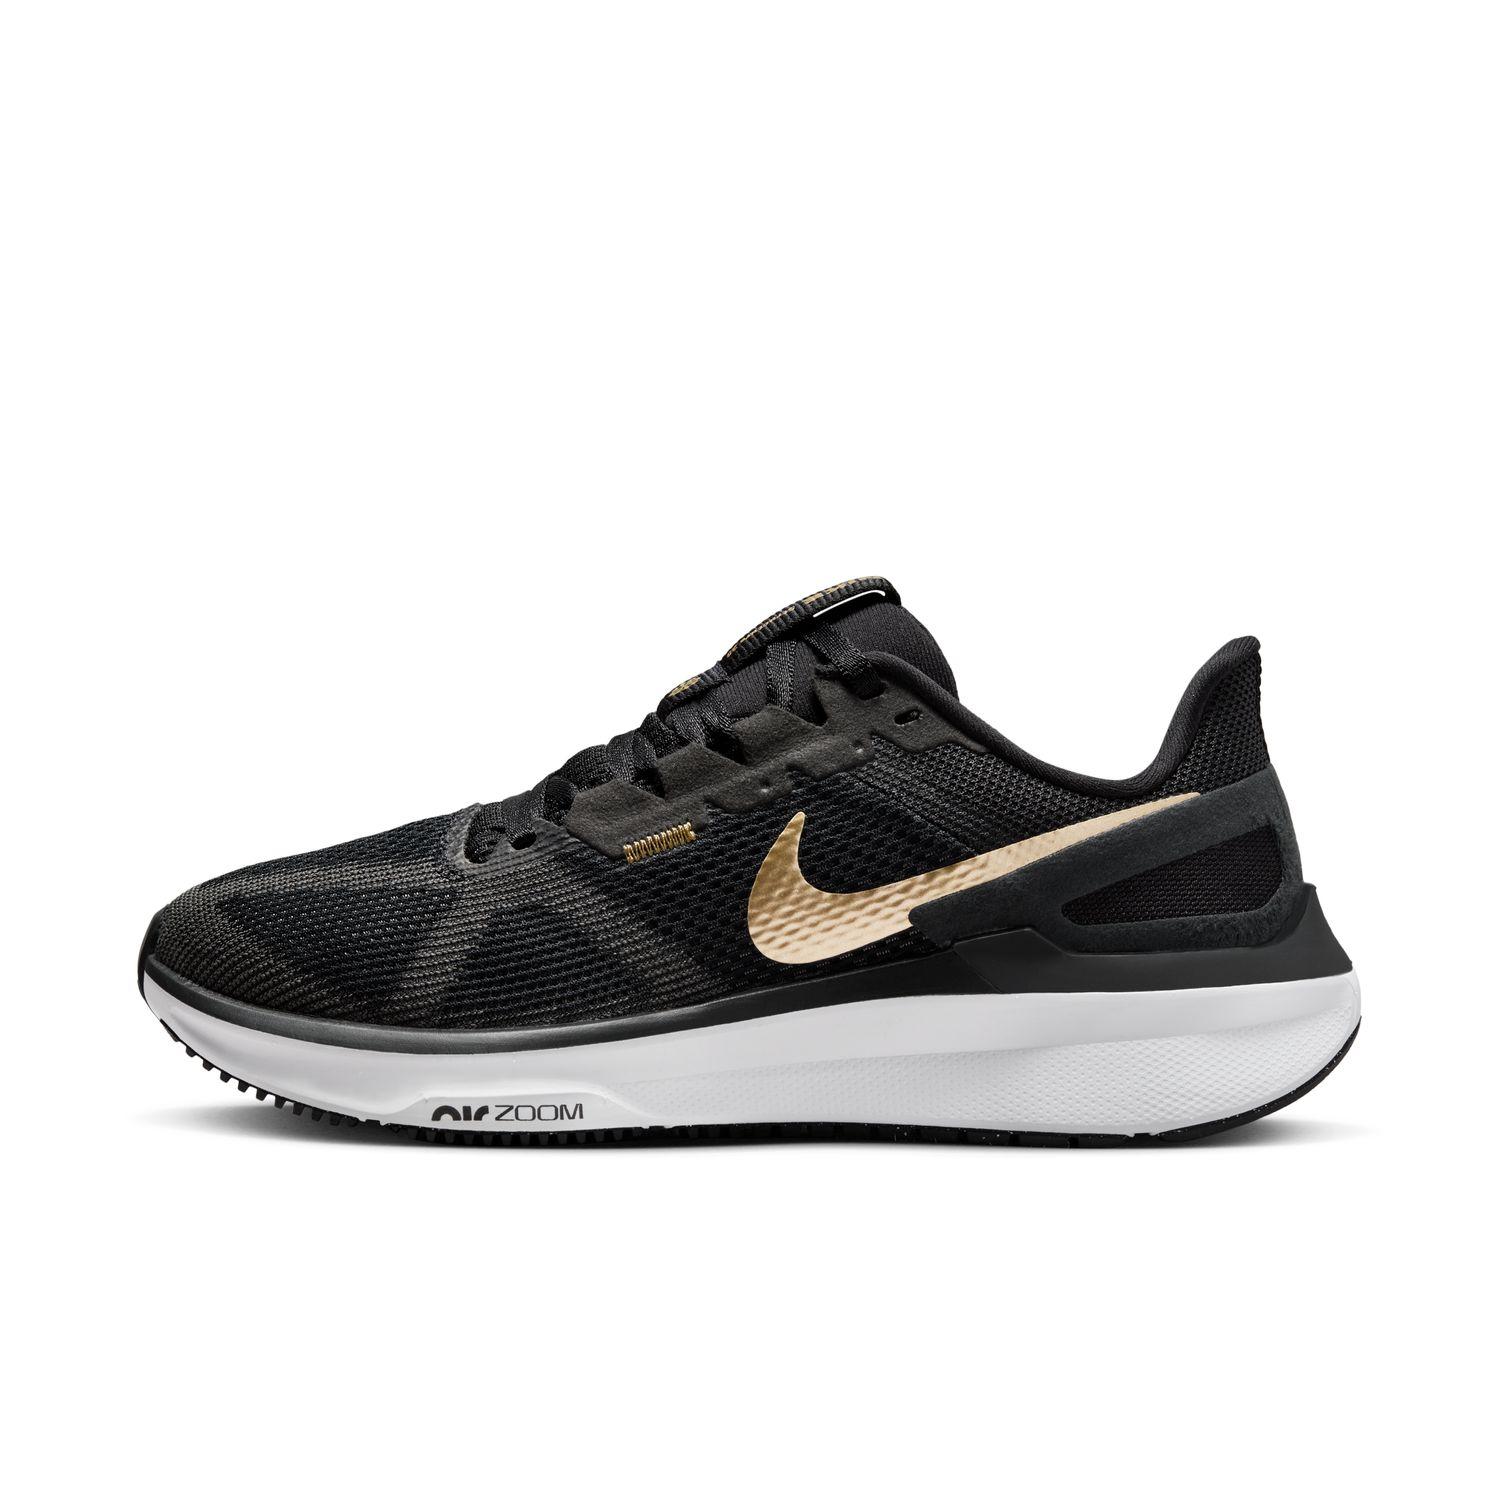 NIKE】W AIR ZOOM STRUCTURE 25|ABC-MART(エービーシー・マート)の通販